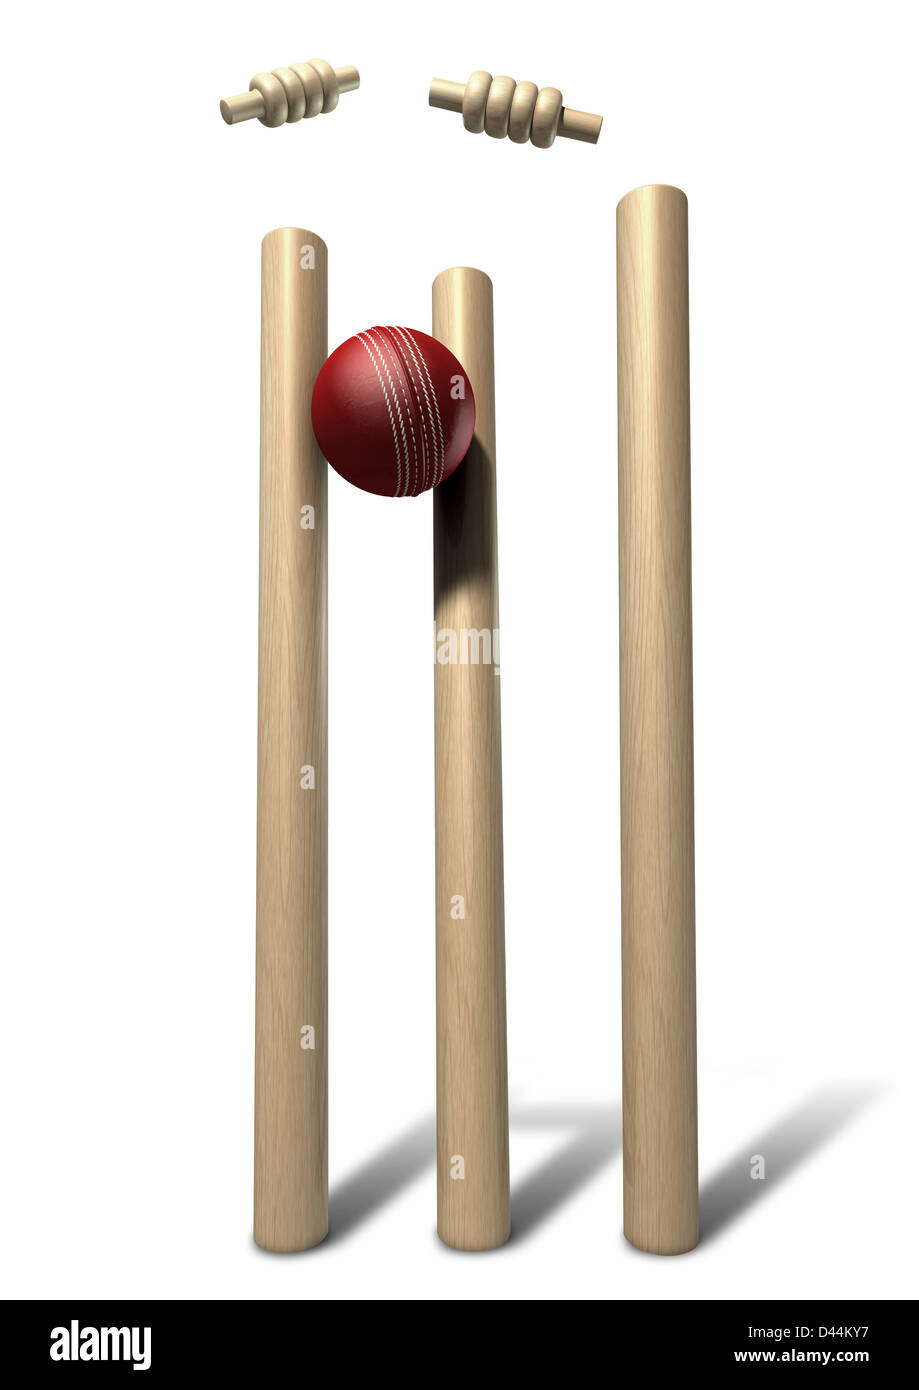 A red leather cricket ball striking and unsettling wooden cricket wickets and bails on an isolated background Stock Photo